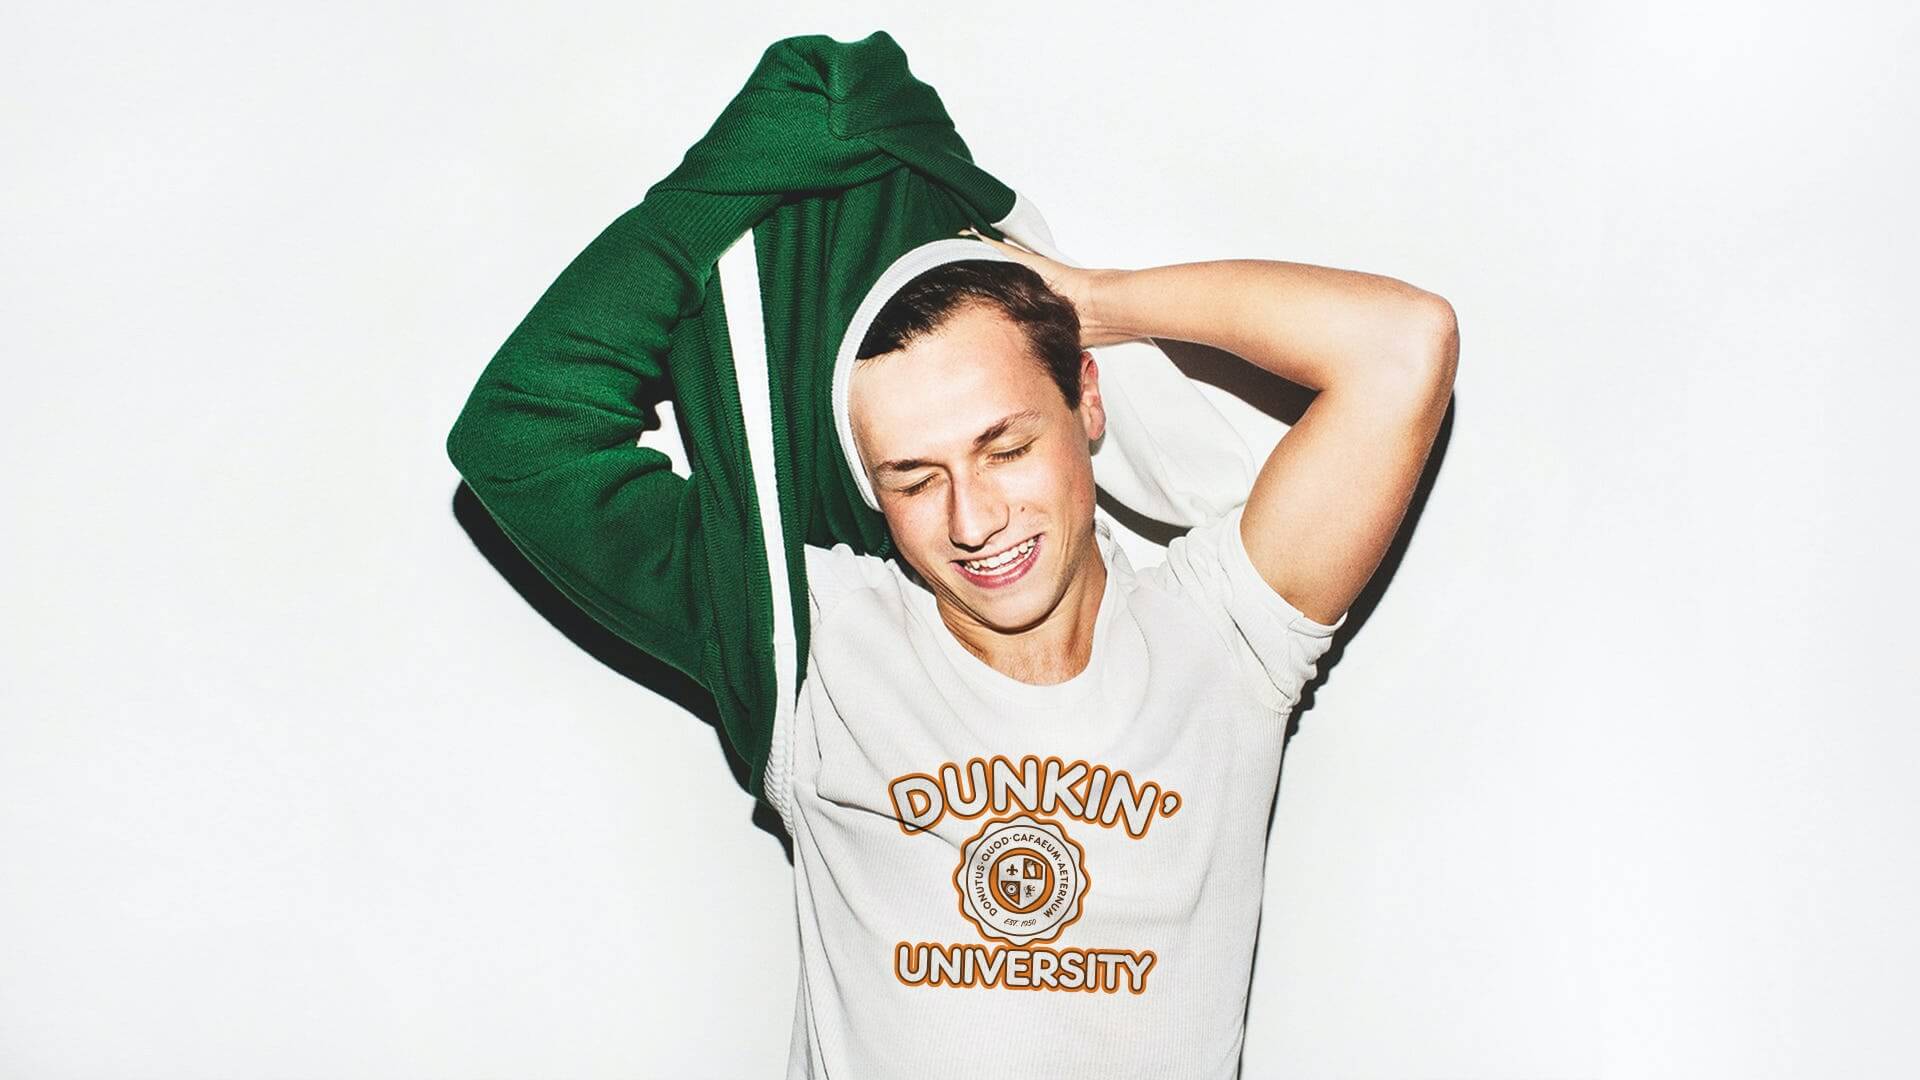 A person in a white Dunkin' Donuts tshirt who is taking off a green sweatshirt